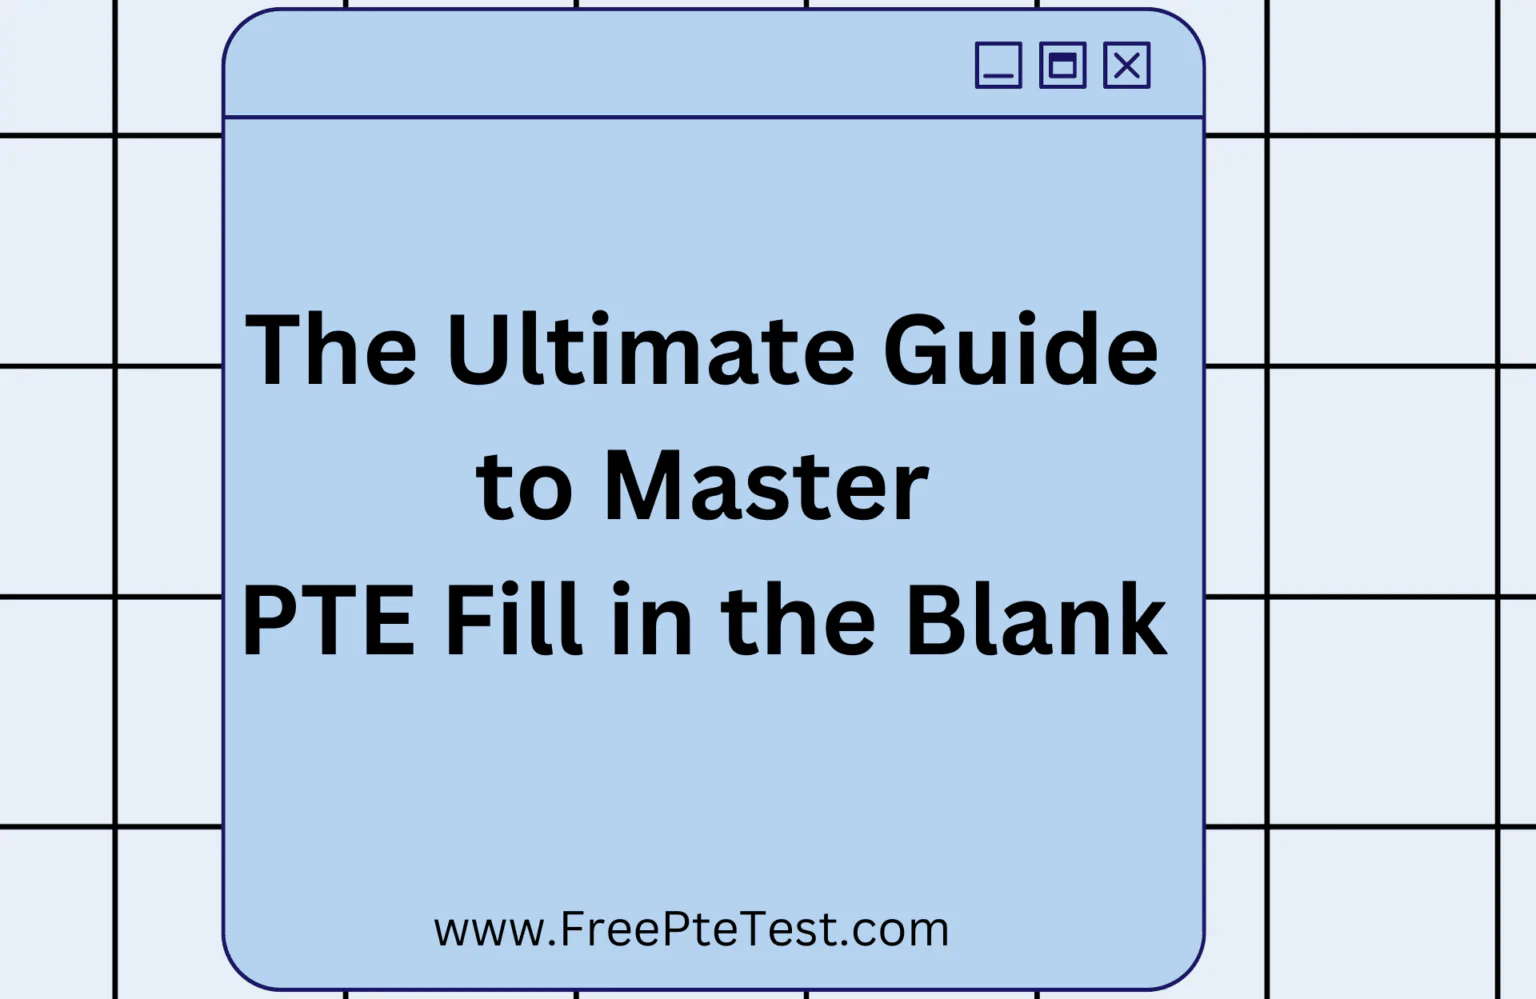 The Ultimate Guide to Master PTE Fill in the Blank